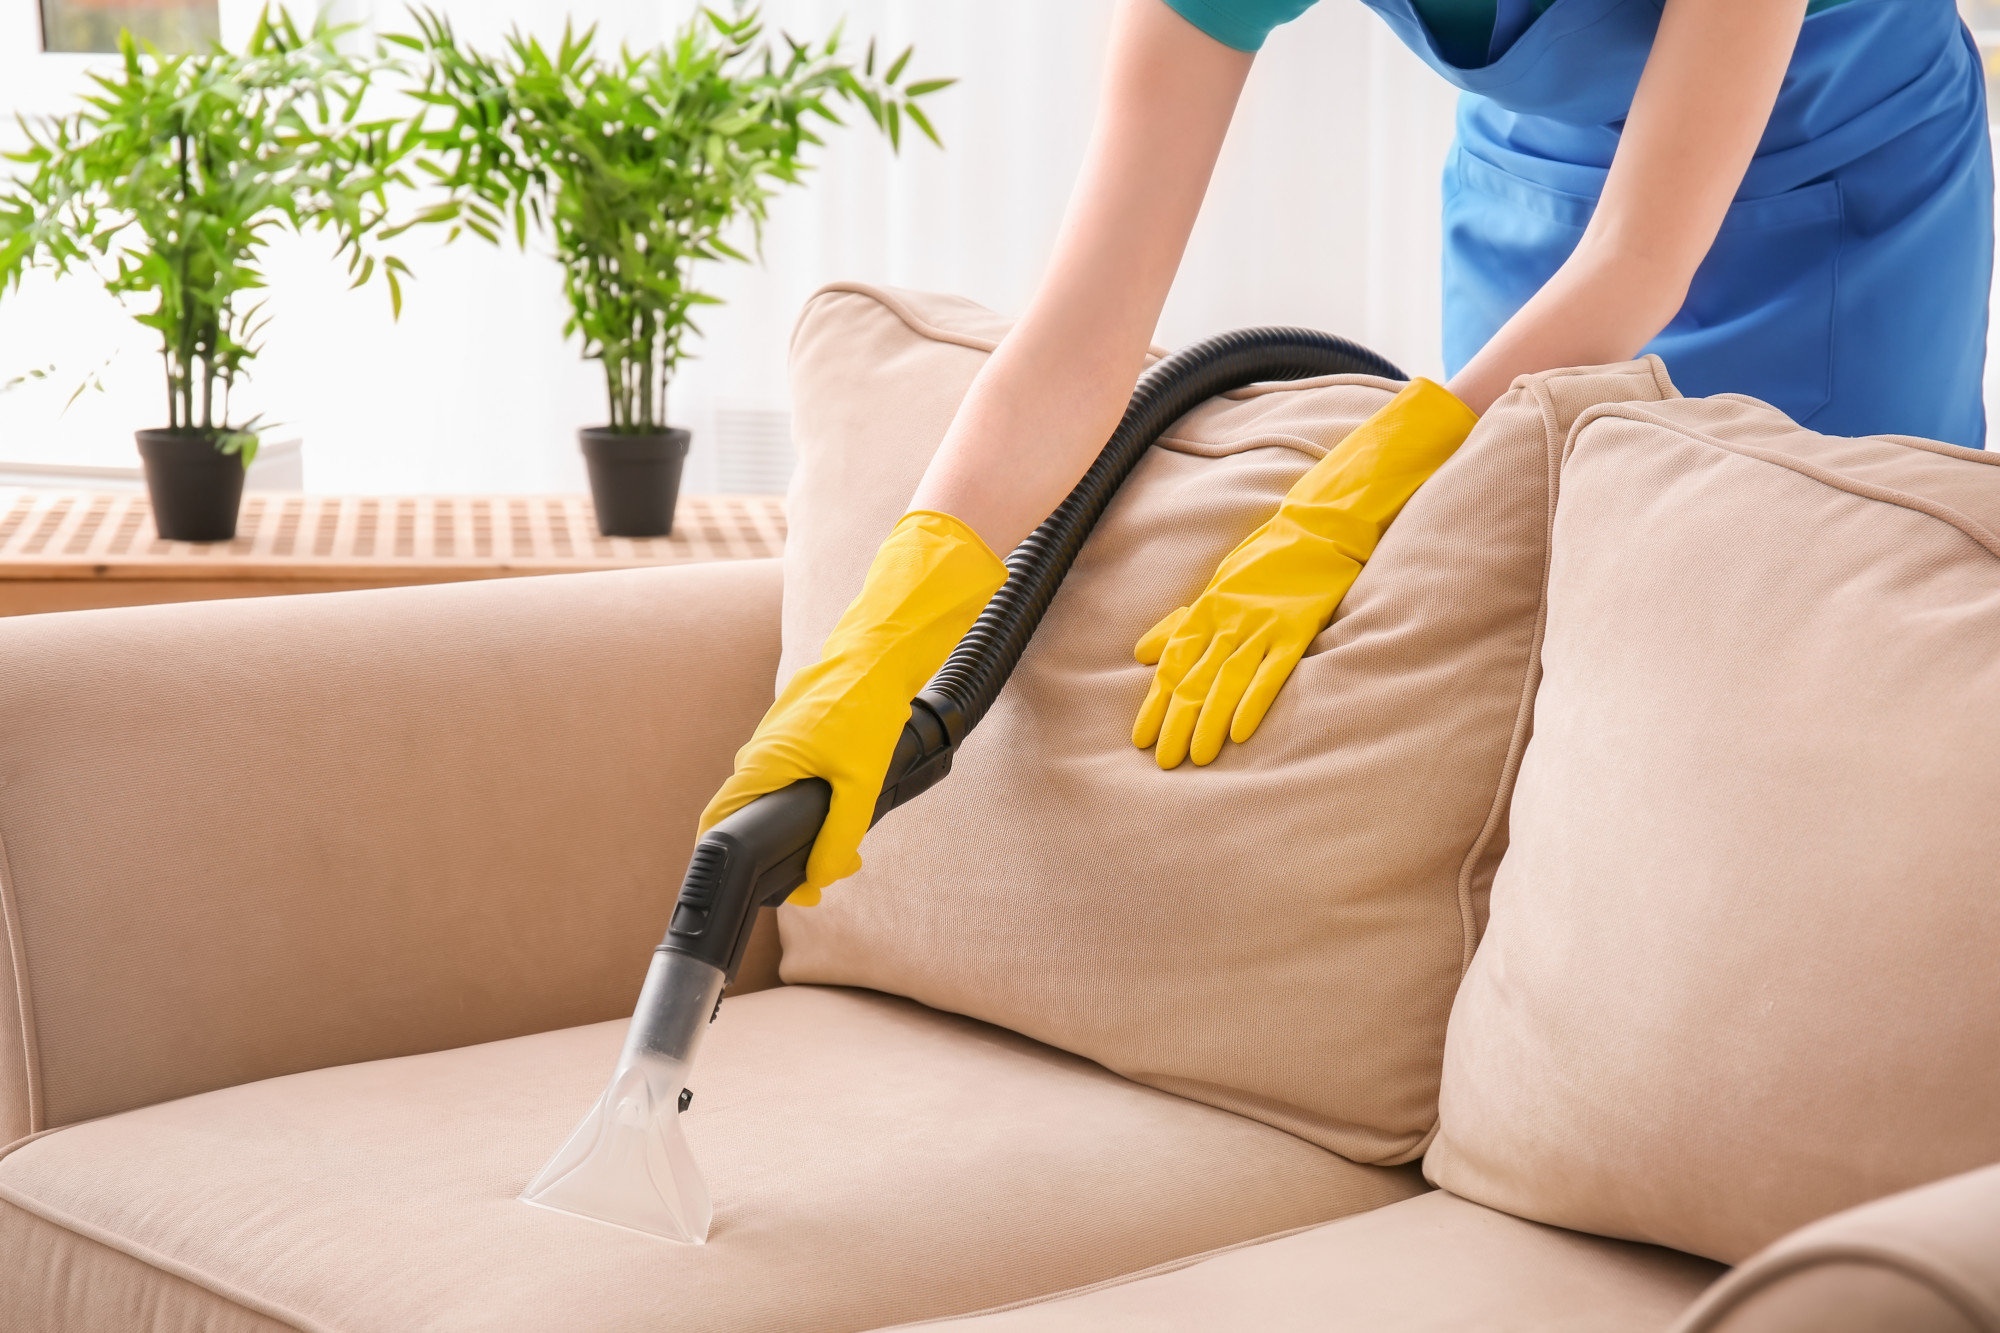 Tricky Upholstery: How to Clean a Smelly Couch